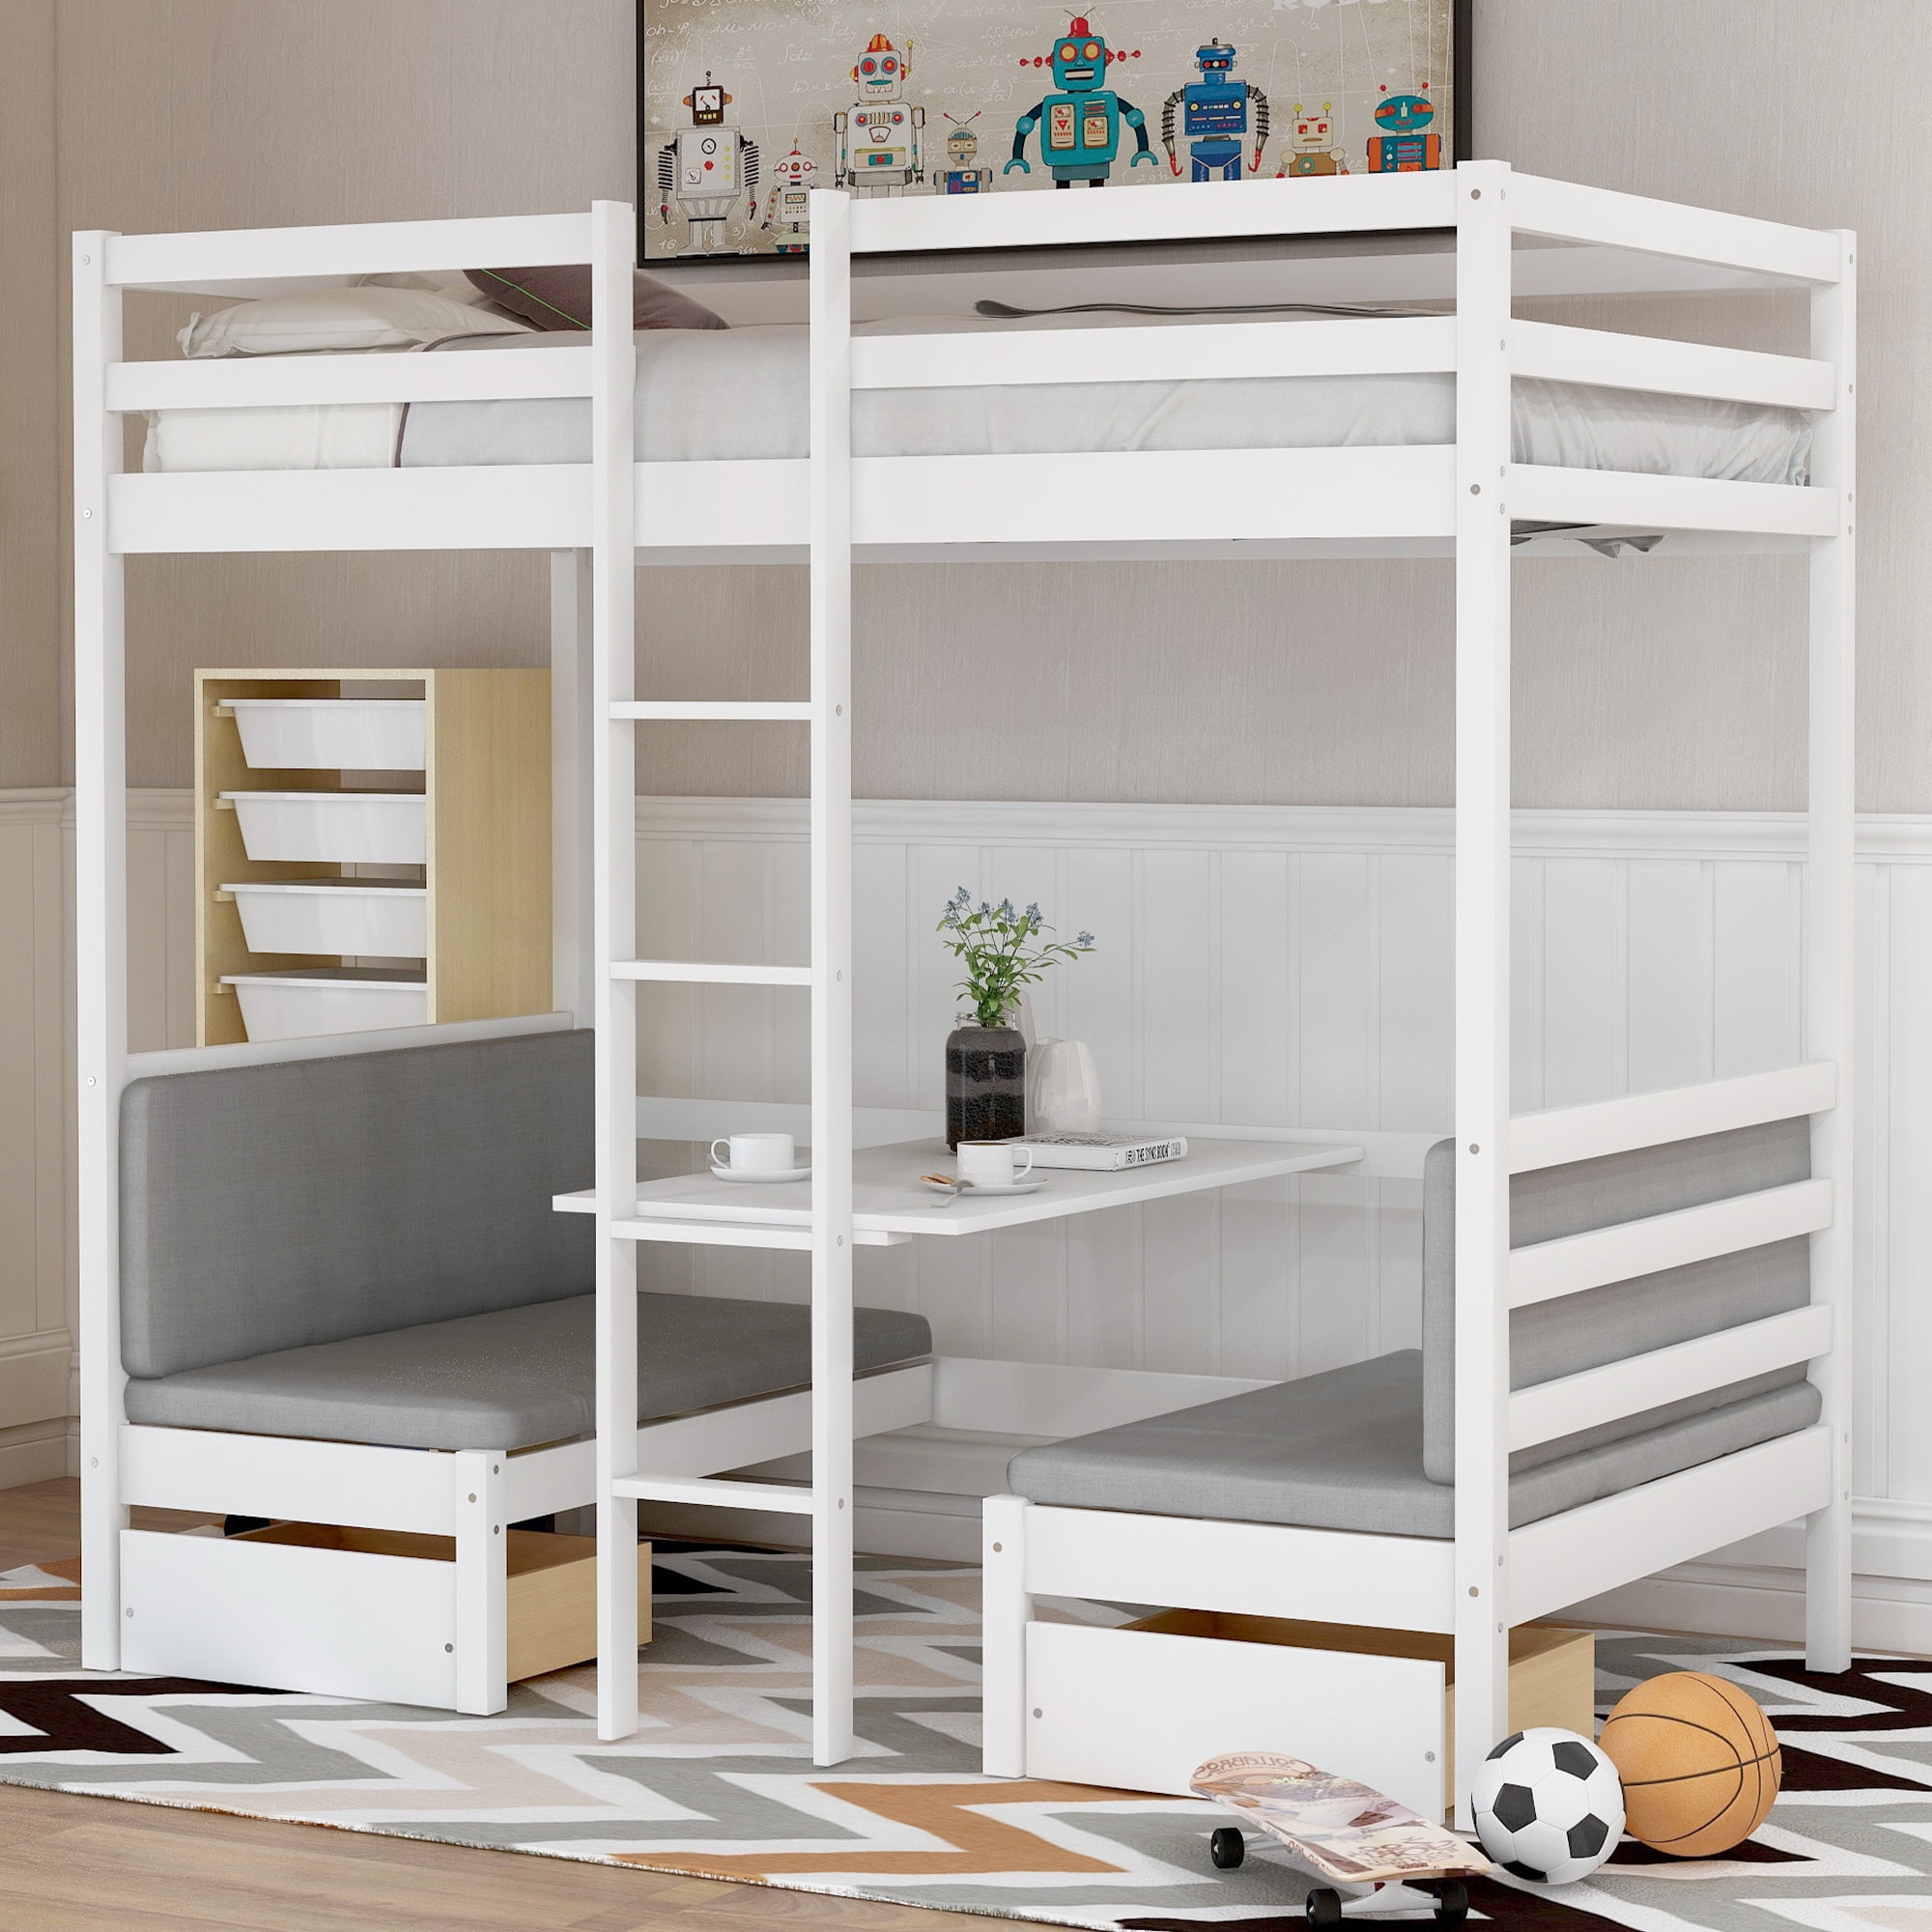 Euroco Solid Wood Convertible Twin Bunk Bed With Desk 2 Drawers, Bunk Bed Shelf Bed Bath And Beyond